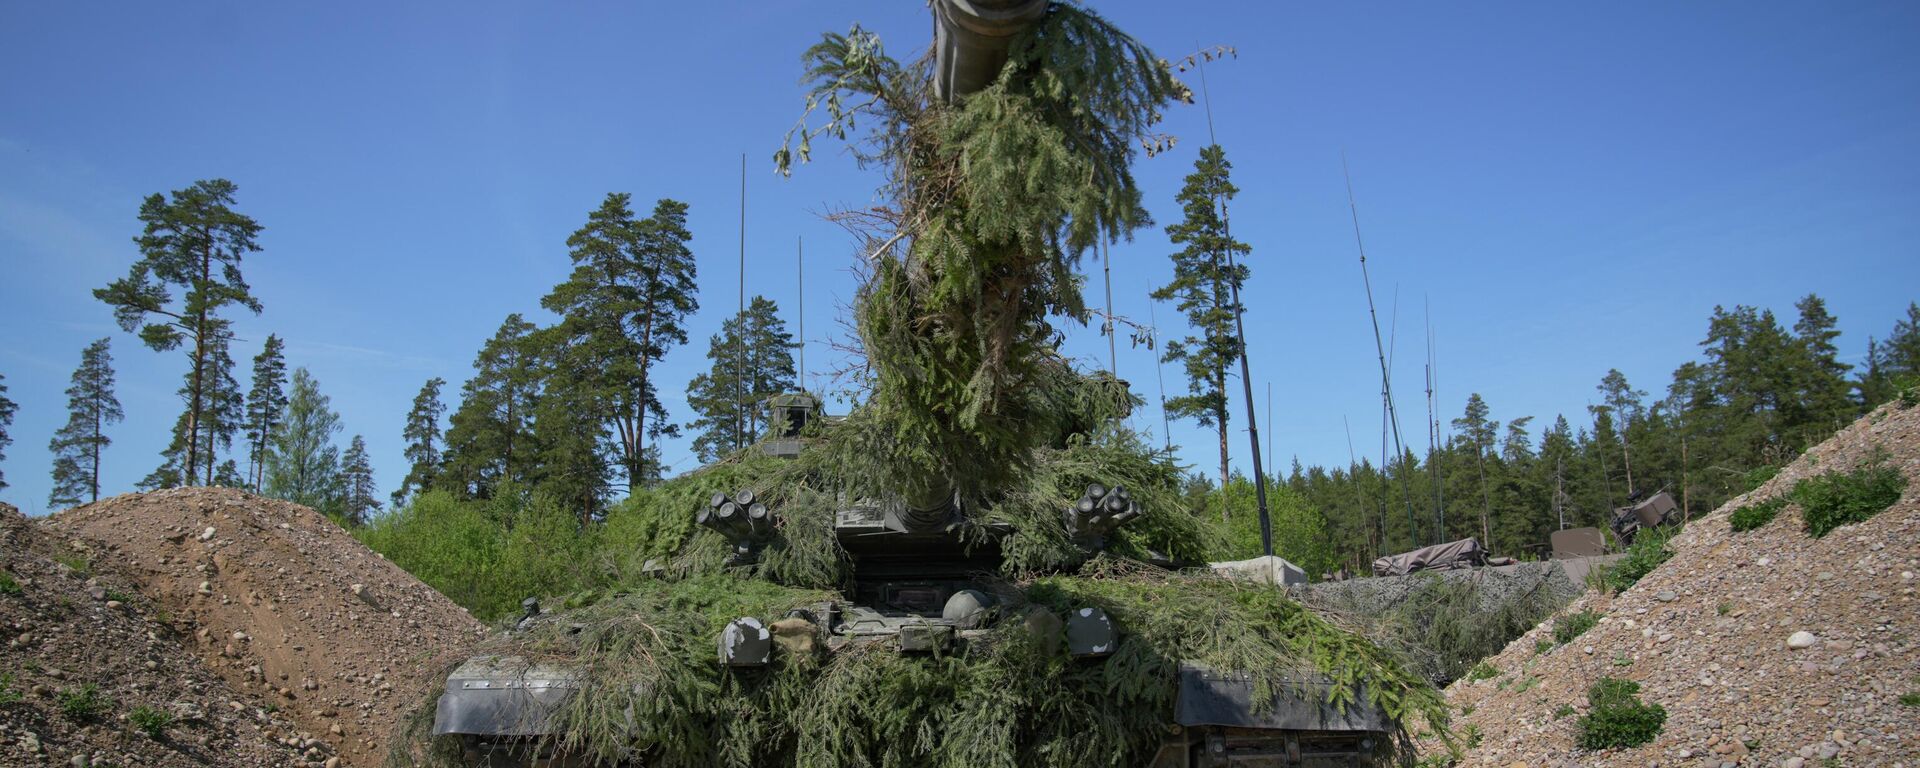 A Challenger 2 tank, this one belonging to the British army, seen during NATO drills in Estonia, May 2023. - Sputnik International, 1920, 17.08.2023